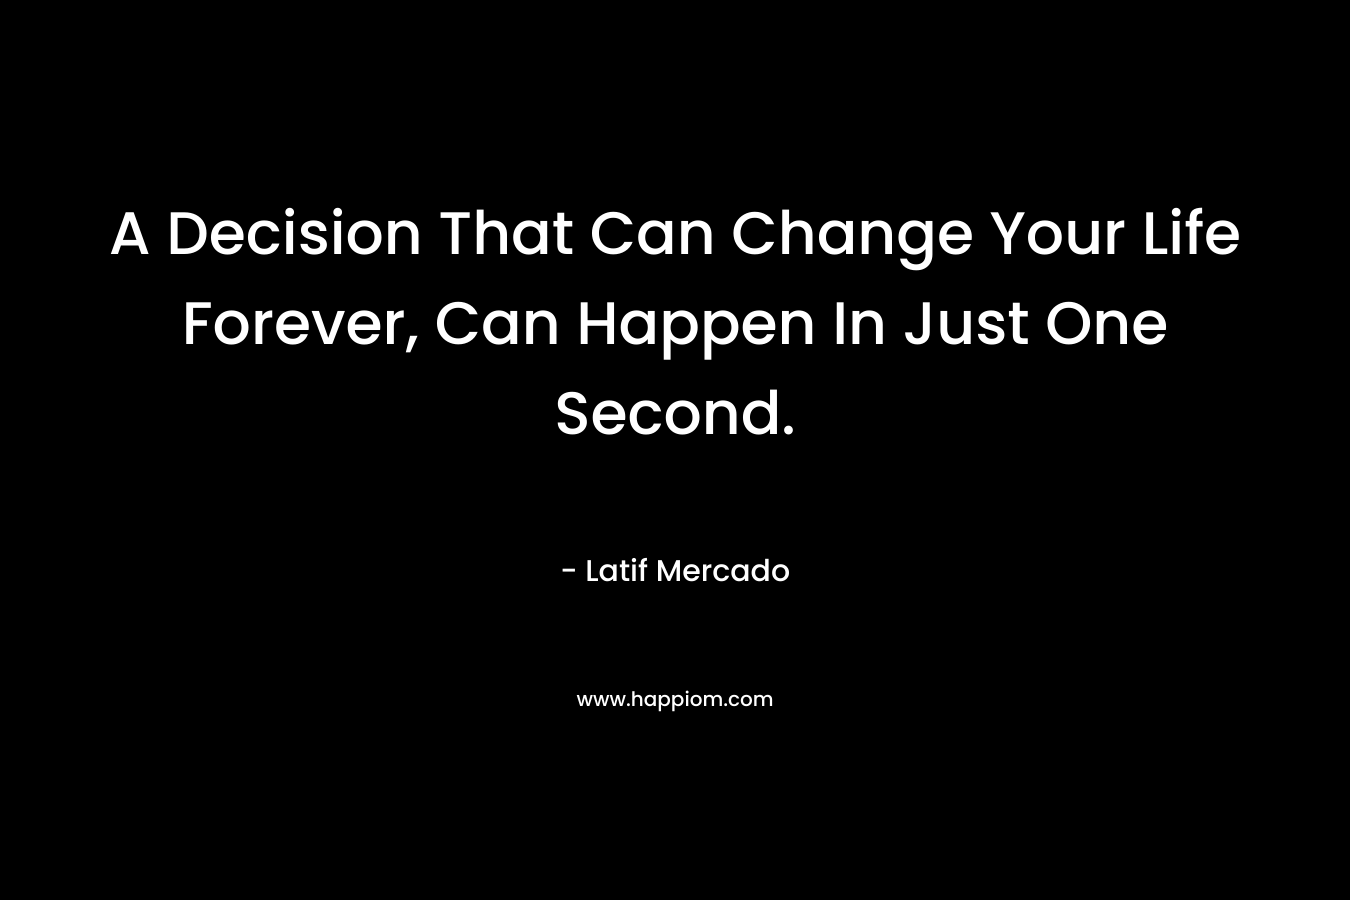 A Decision That Can Change Your Life Forever, Can Happen In Just One Second. – Latif Mercado